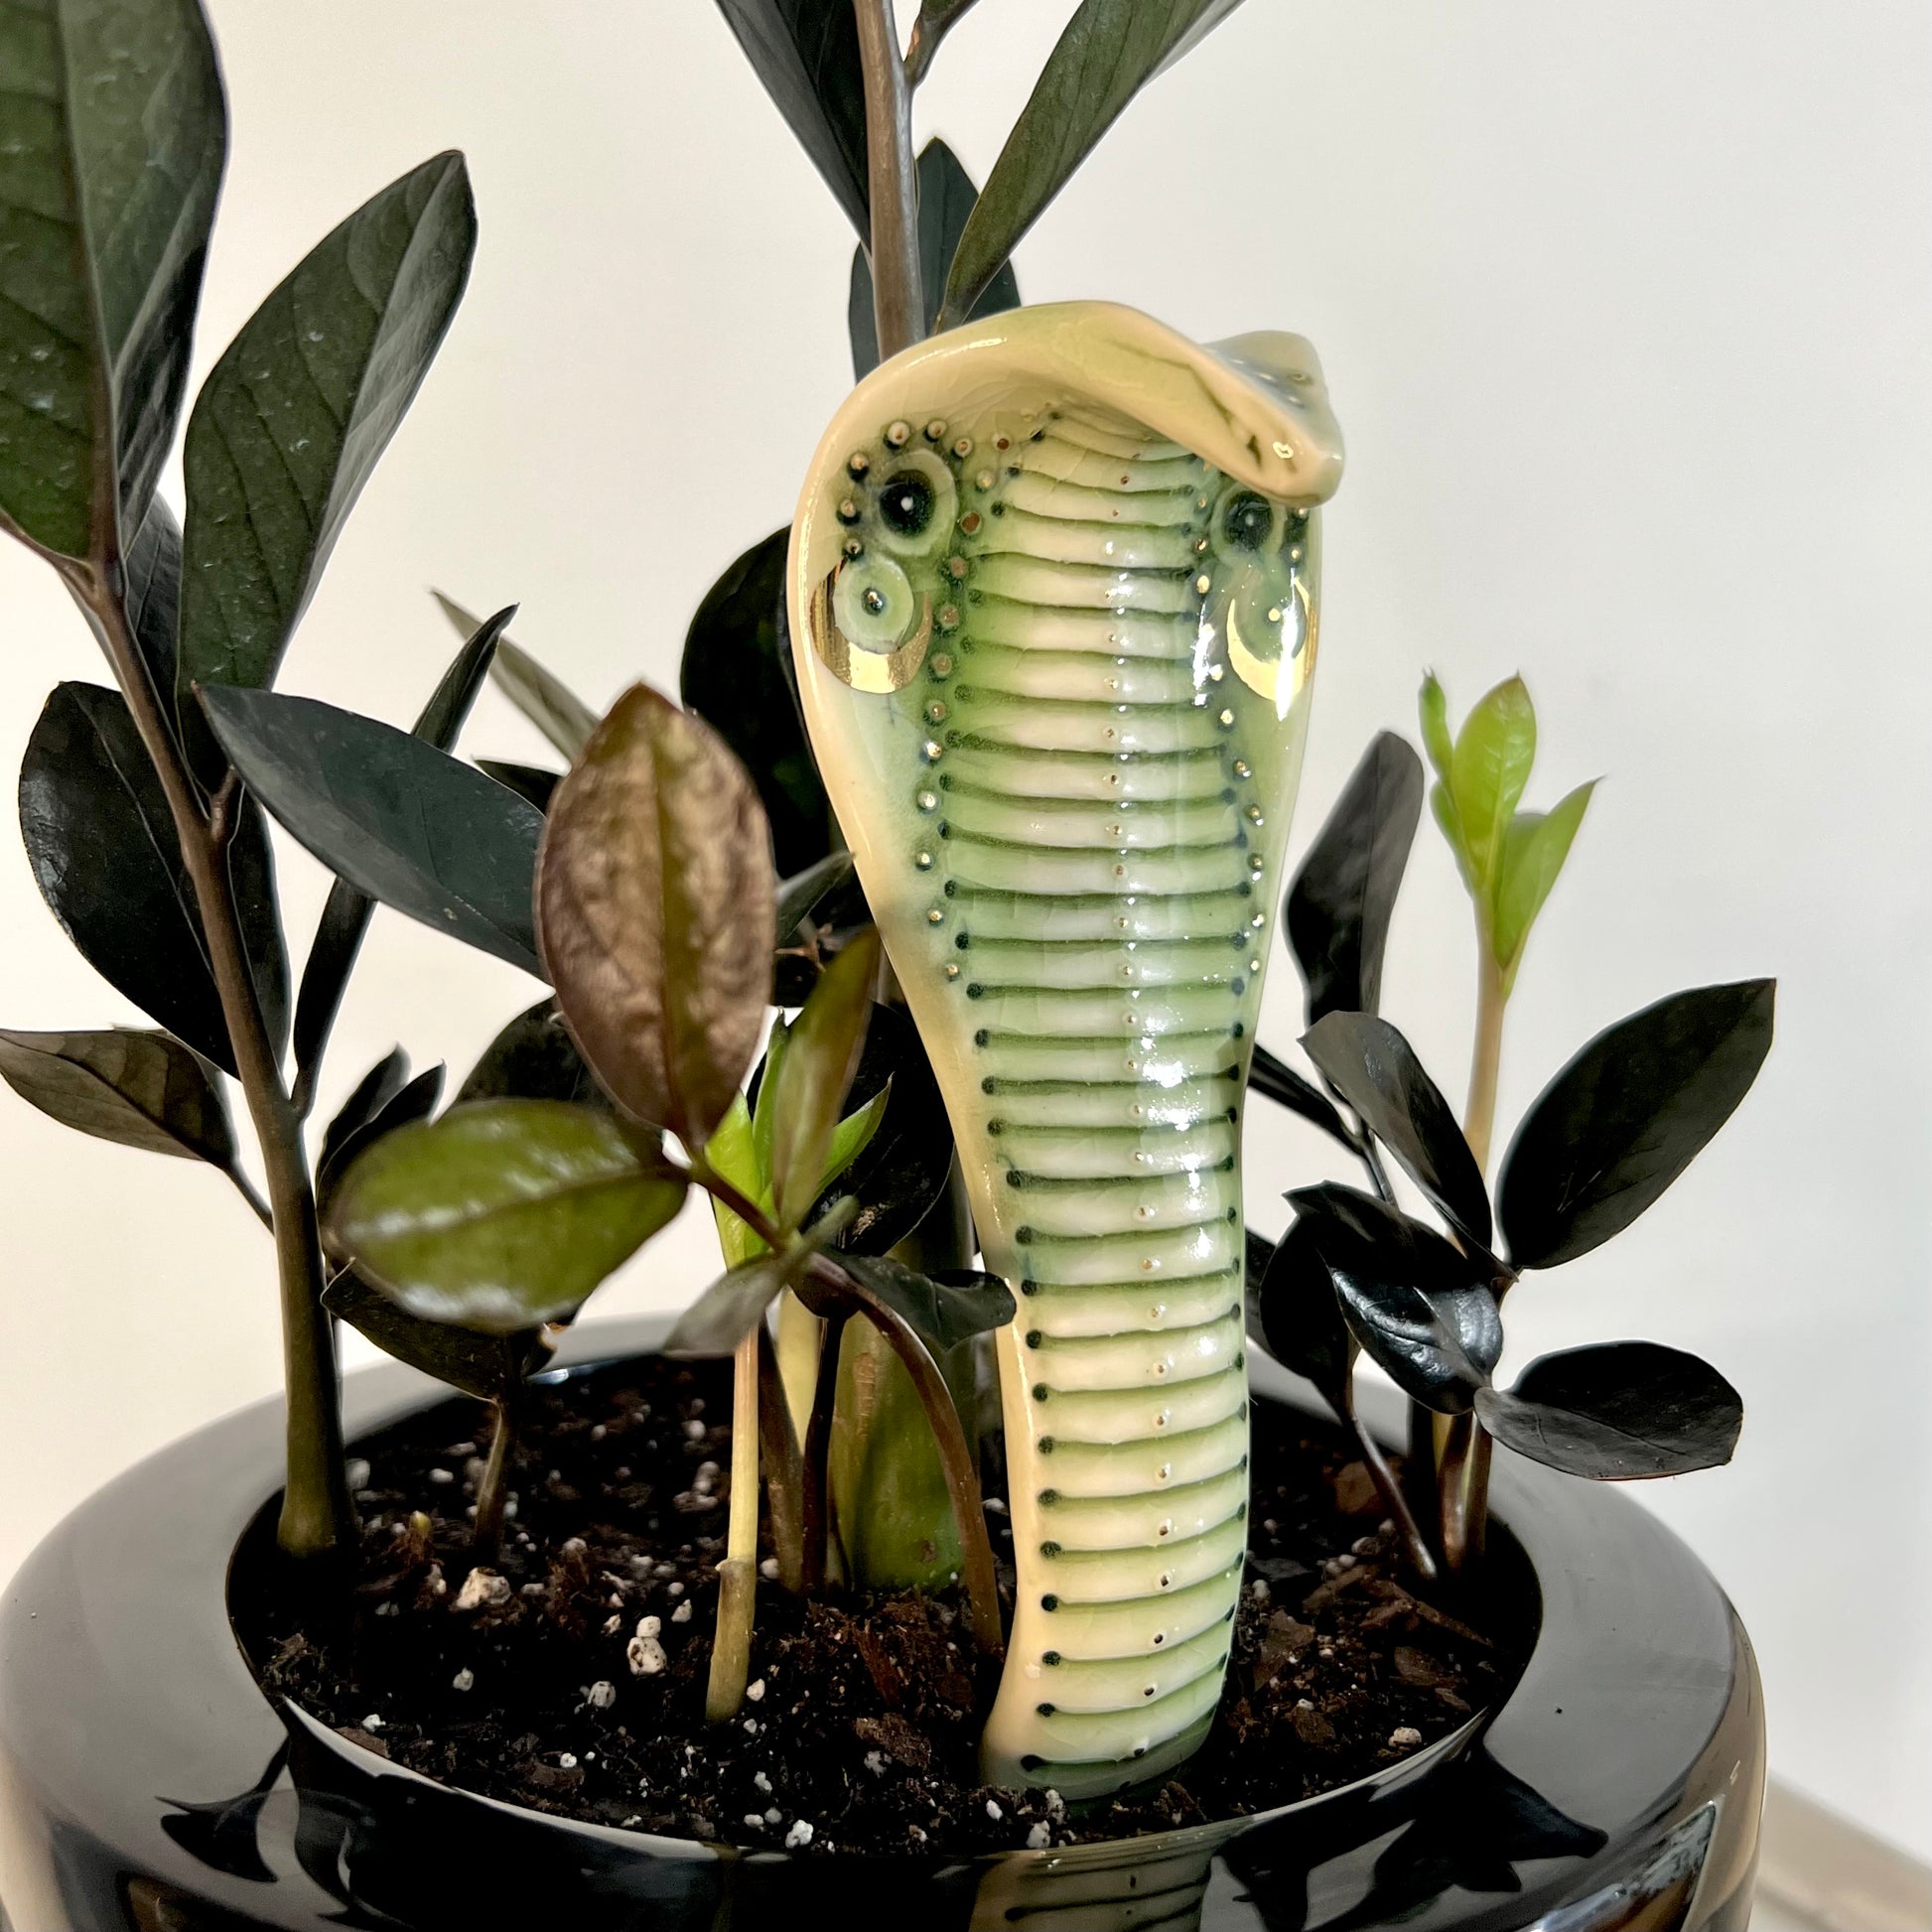 Product Image: Planter Snake 4 - Hand crafted Porcelain Home Ornament. Snake with Brass Rod for placing in pots with plants.